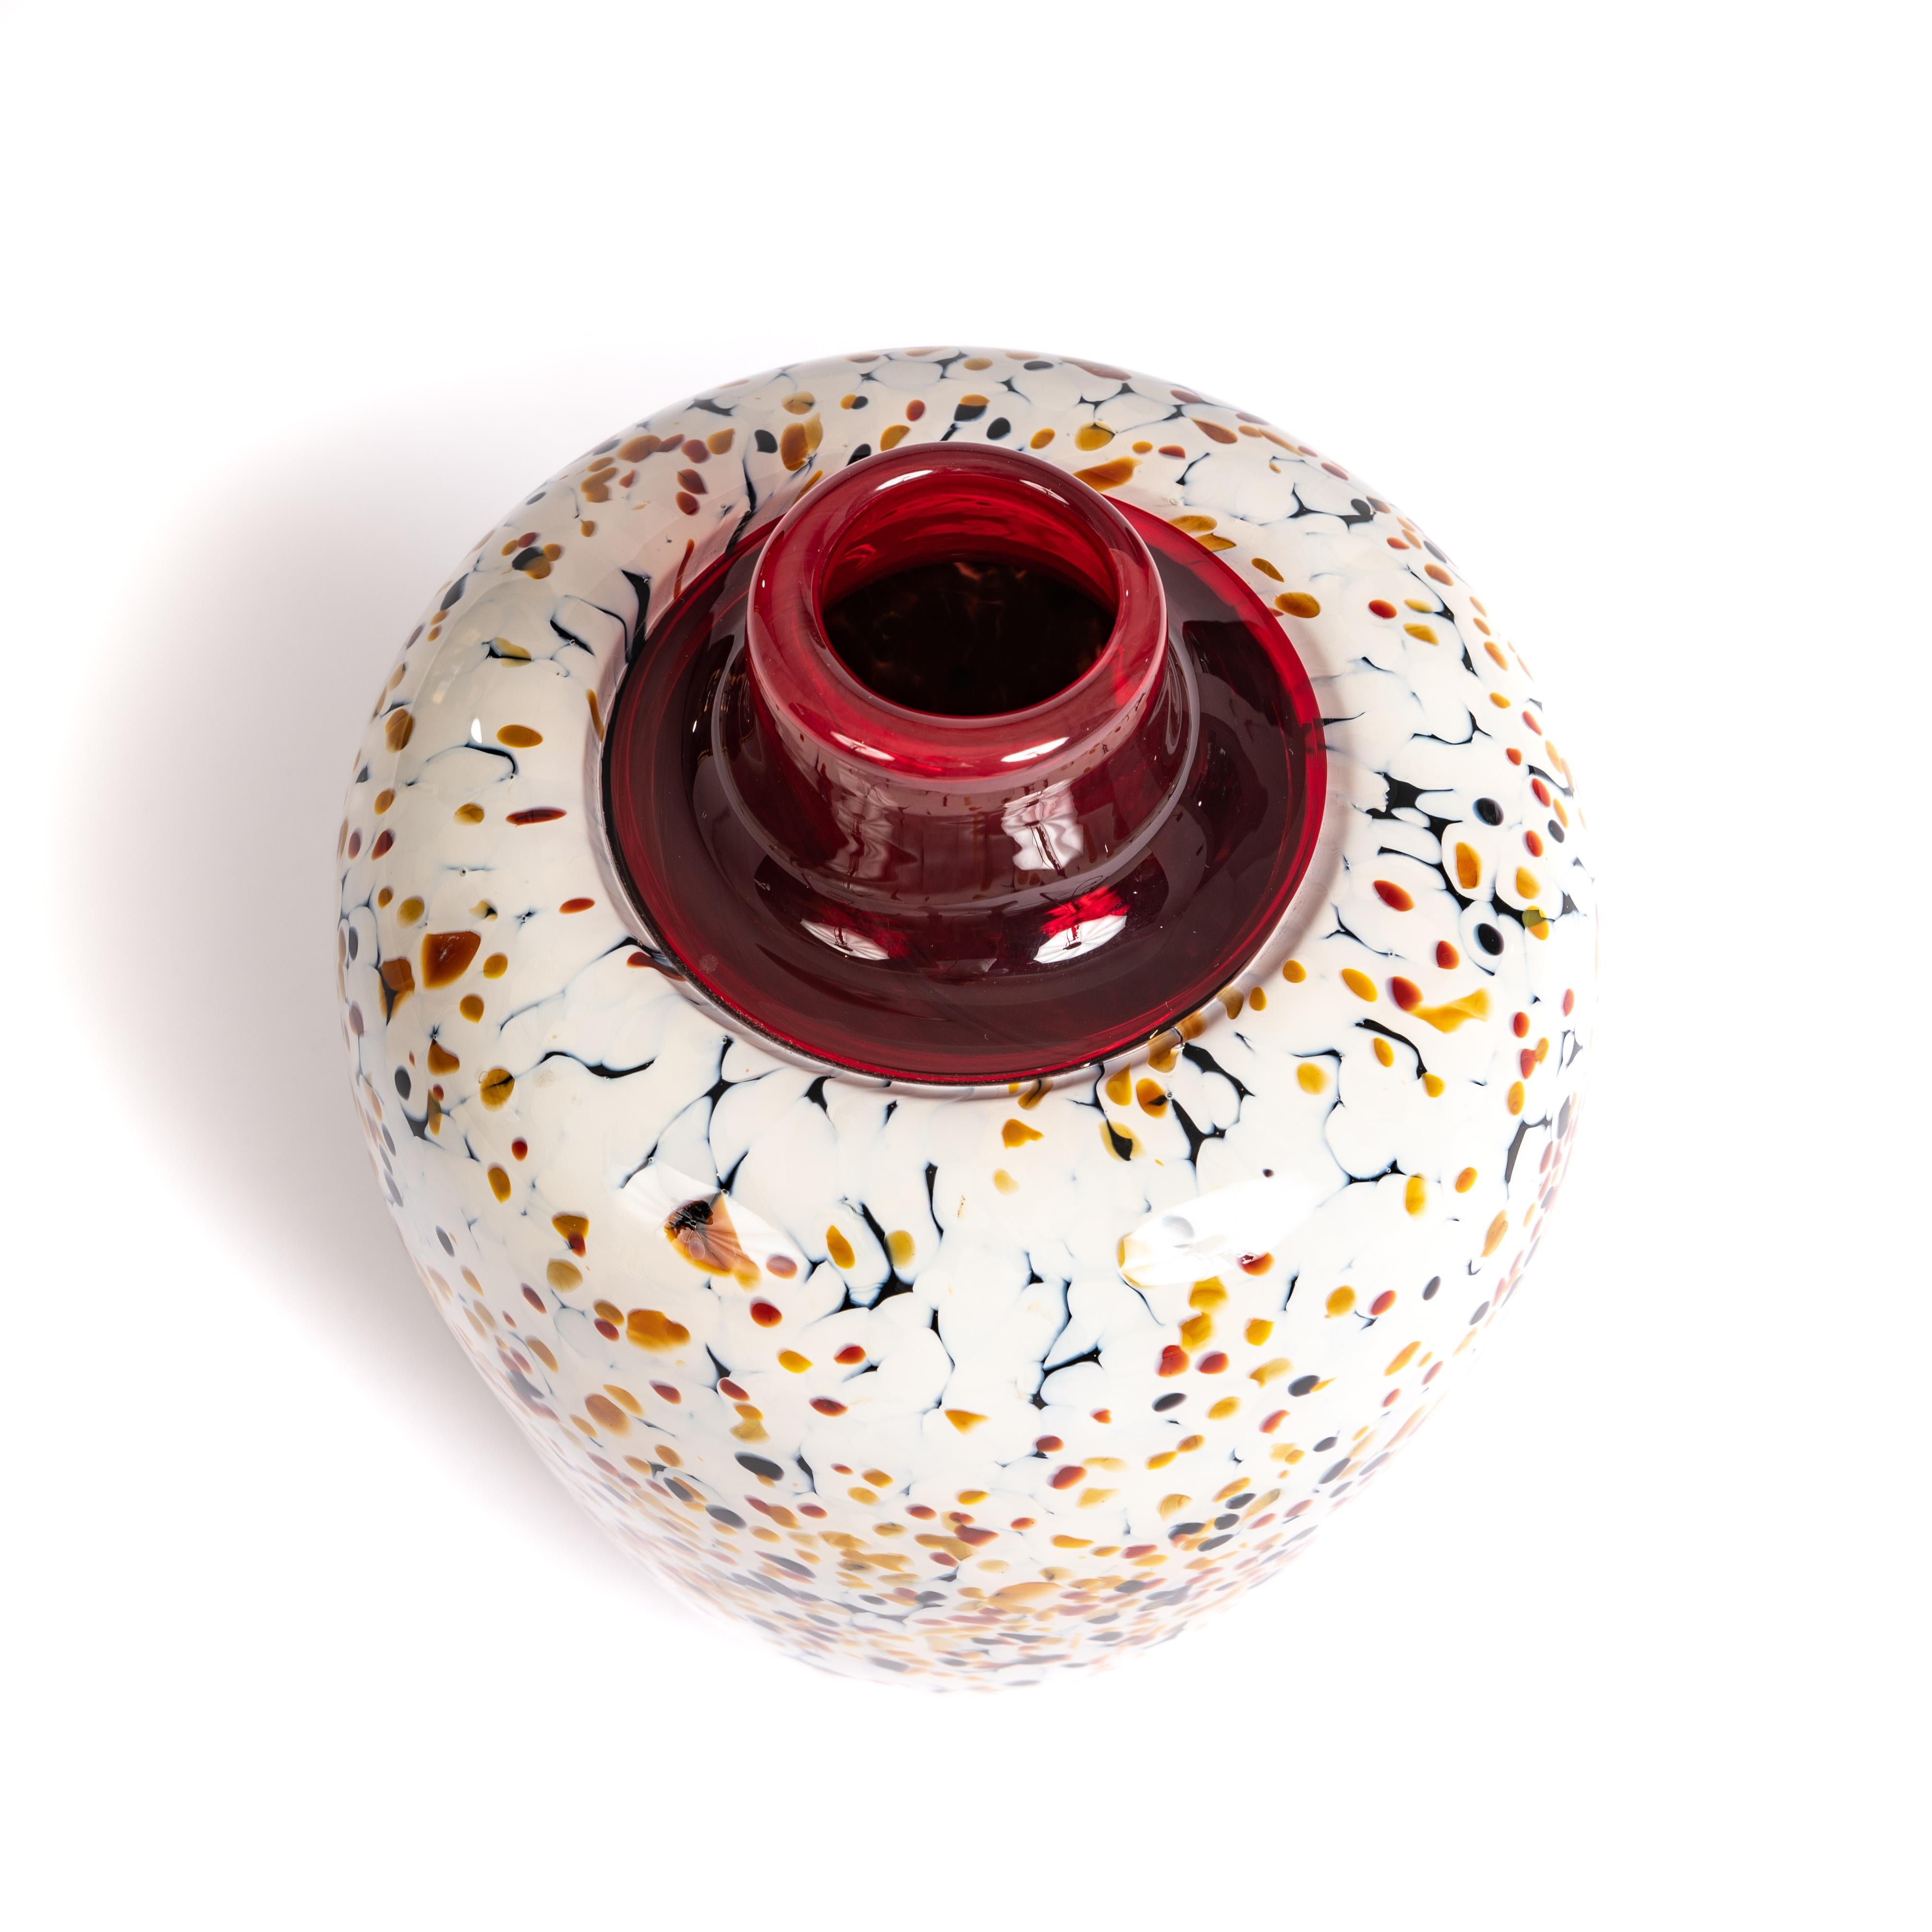 Modern Italian Murrine Murano glass vase in red-off white-black-camel by Paolo Crepax
Conical vase shape with plain red transparent vase opening. The body glass is not transparent but appears dense.
The white is more of a creamy white the colored